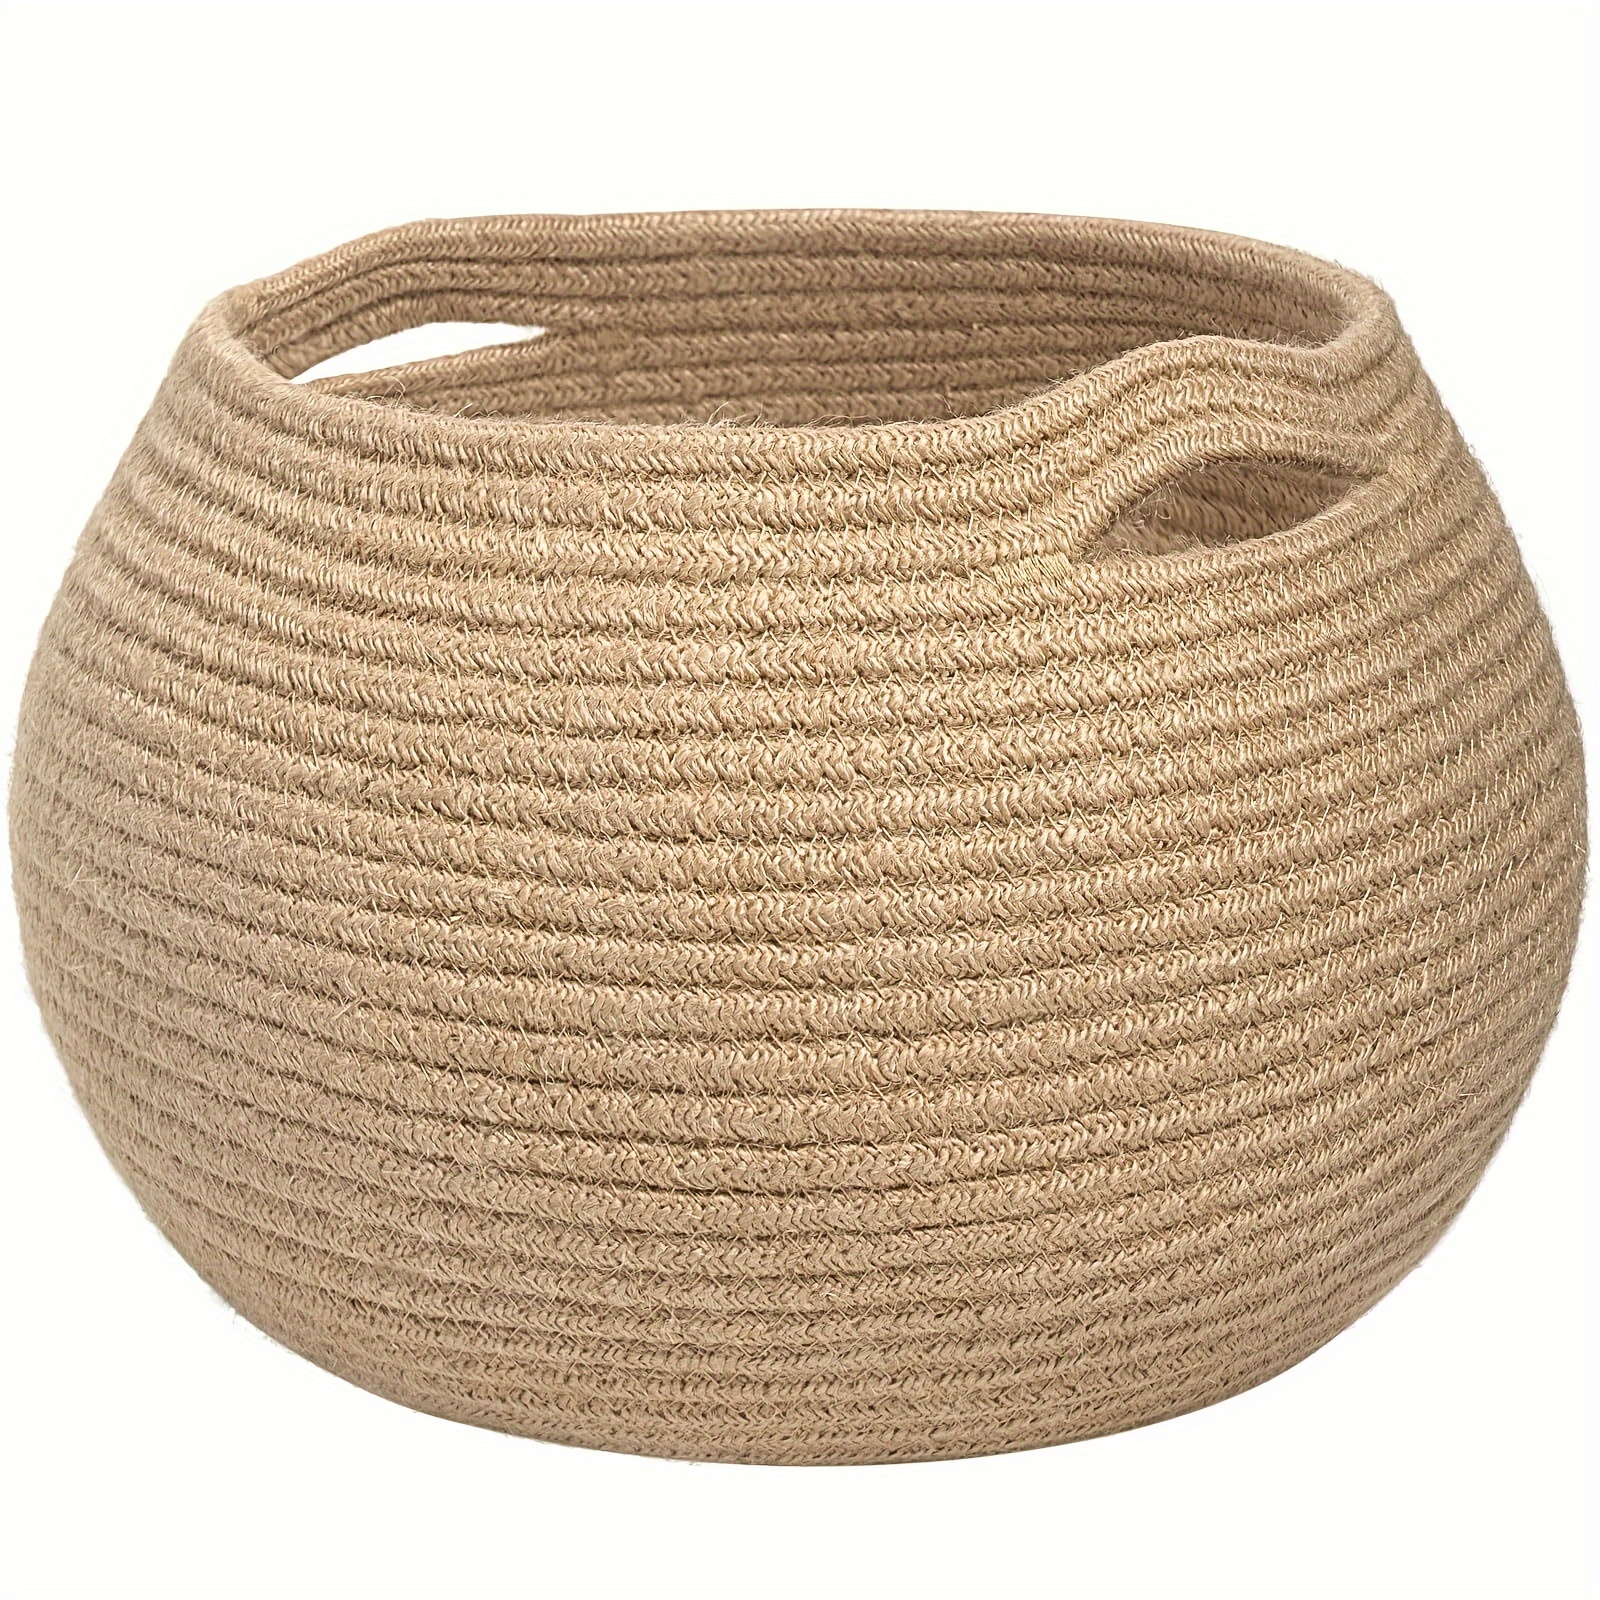 

Boho Chic Jute Storage Basket - 10" Diameter, 8.3" Height | Perfect For Toys, Towels & Plant Decor | Stackable Round Organizer For Bedroom & Kids' Corner